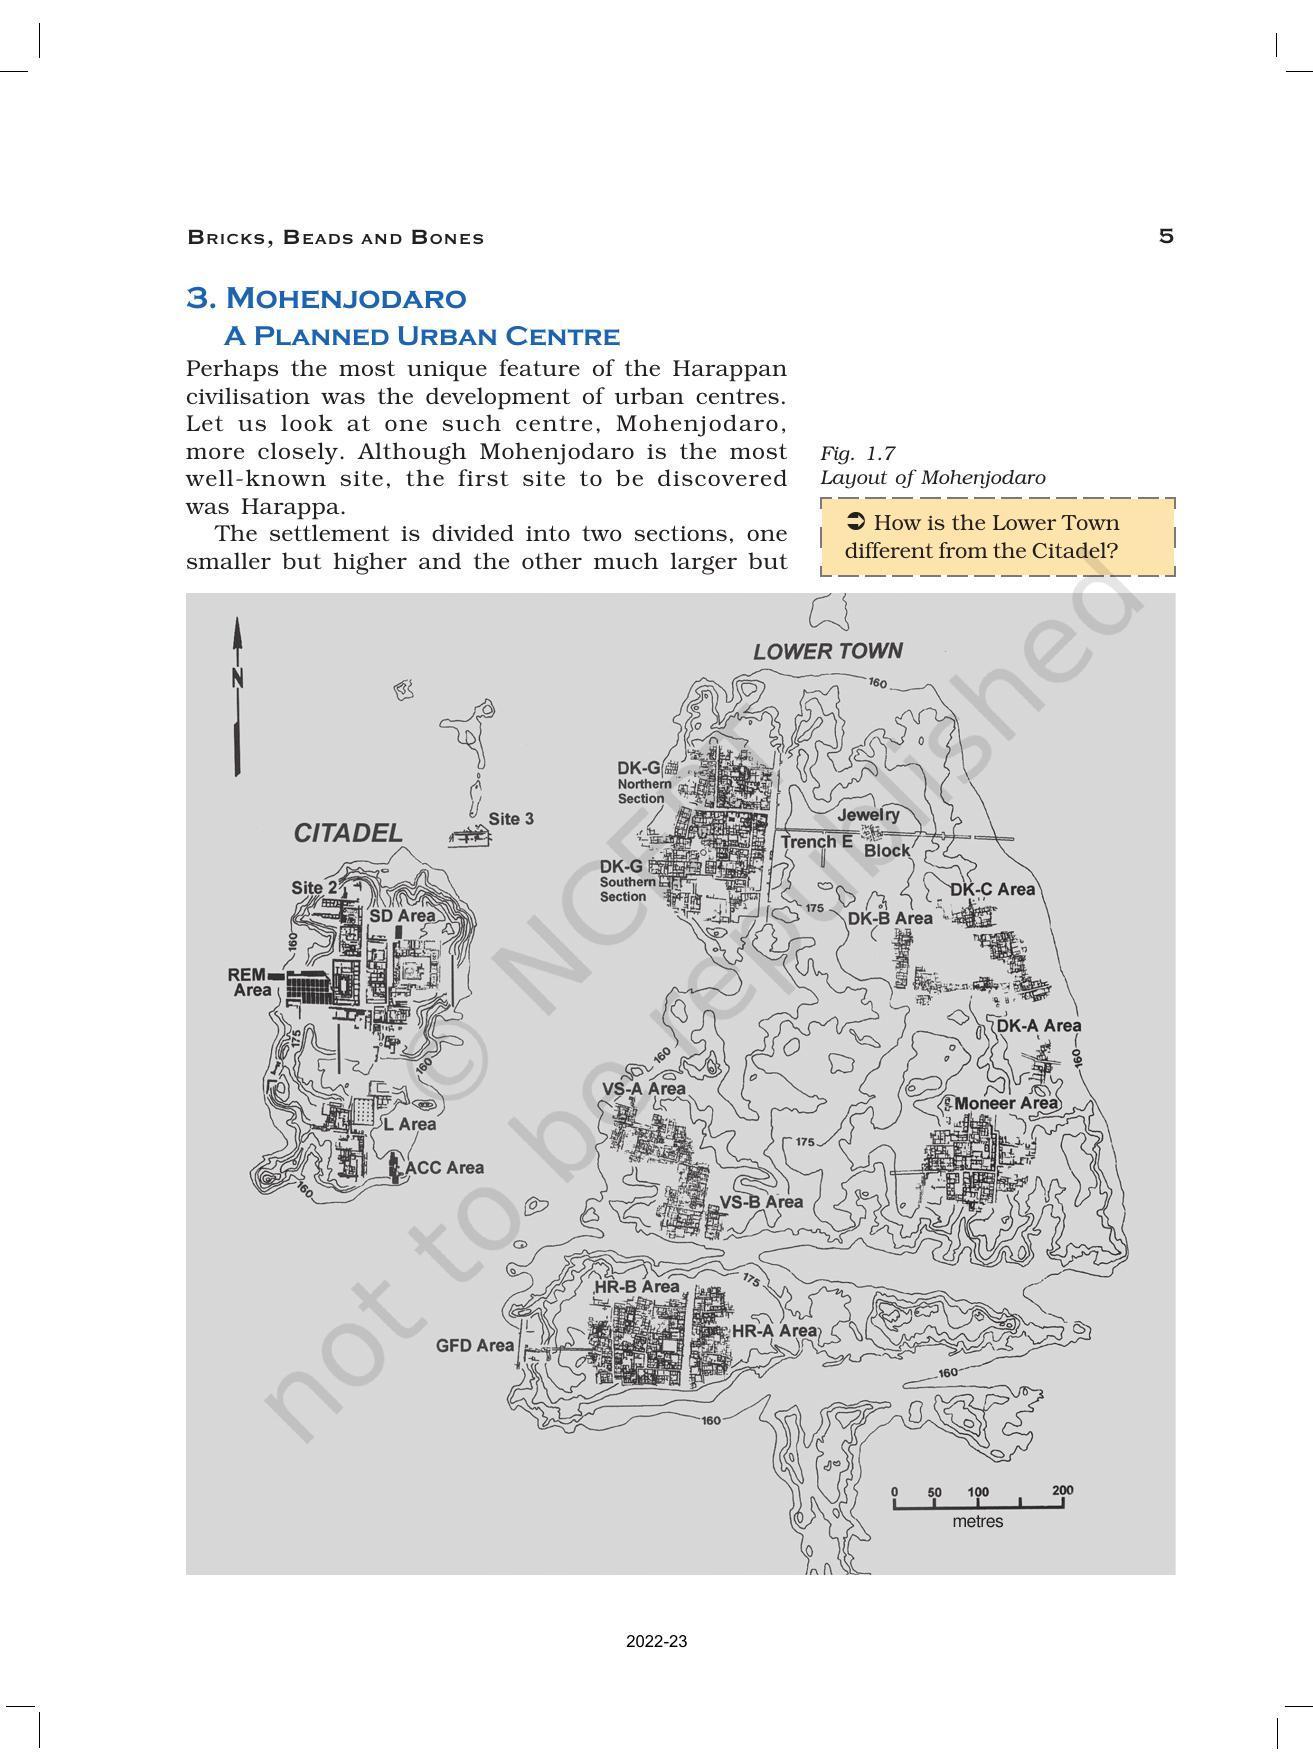 NCERT Book for Class 12 History (Part-1) Chapter 1 Bricks, Beads, and Bones - Page 5